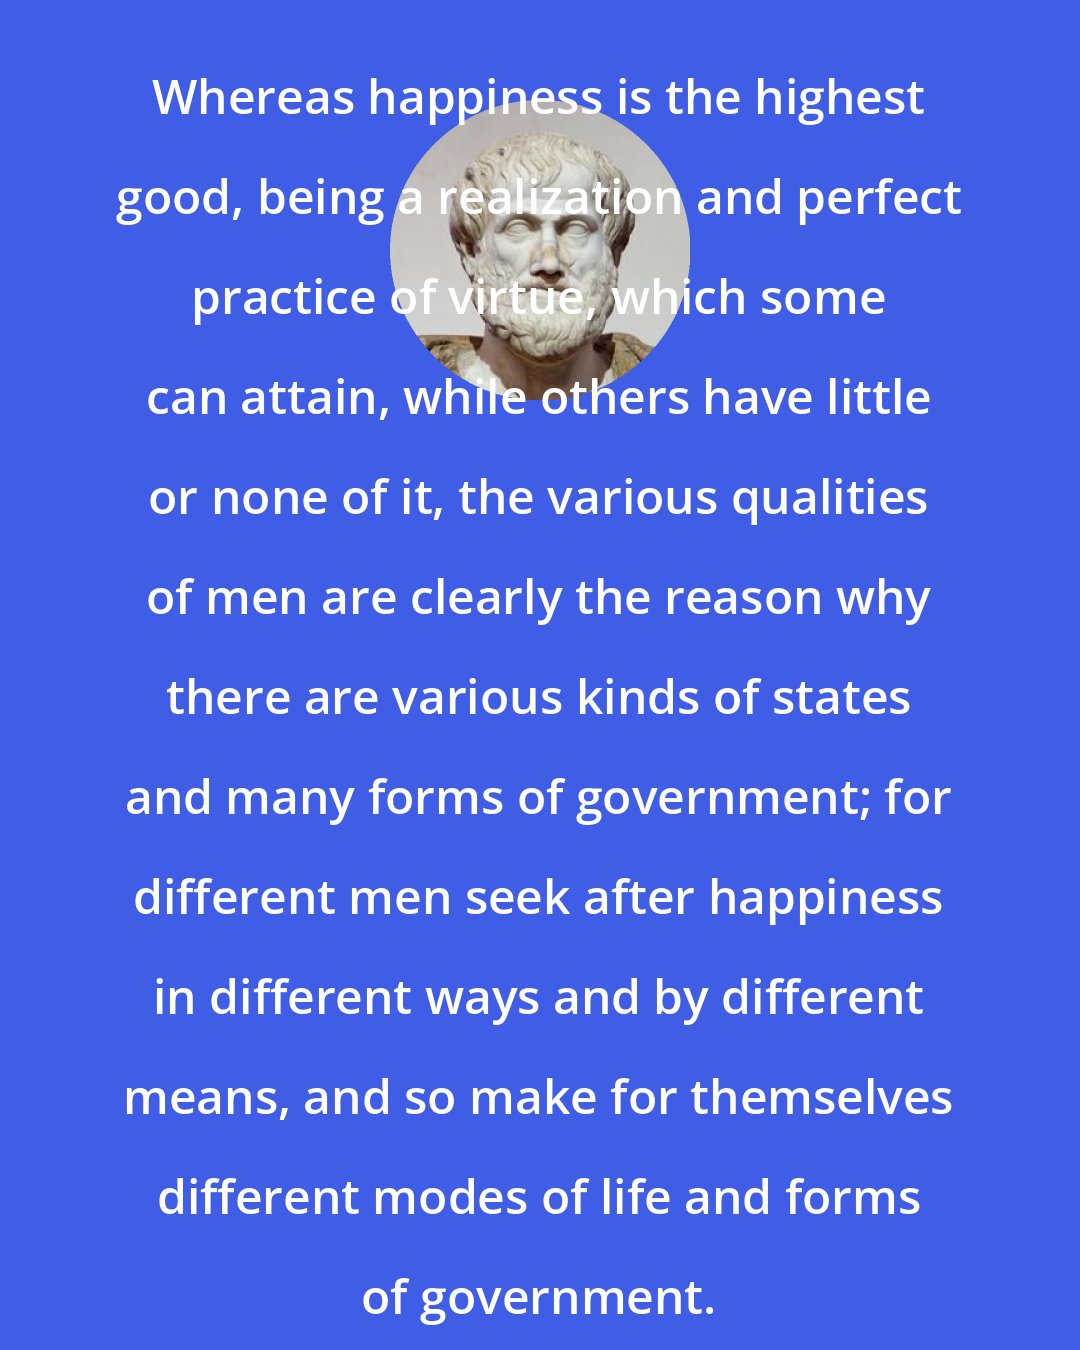 Aristotle: Whereas happiness is the highest good, being a realization and perfect practice of virtue, which some can attain, while others have little or none of it, the various qualities of men are clearly the reason why there are various kinds of states and many forms of government; for different men seek after happiness in different ways and by different means, and so make for themselves different modes of life and forms of government.